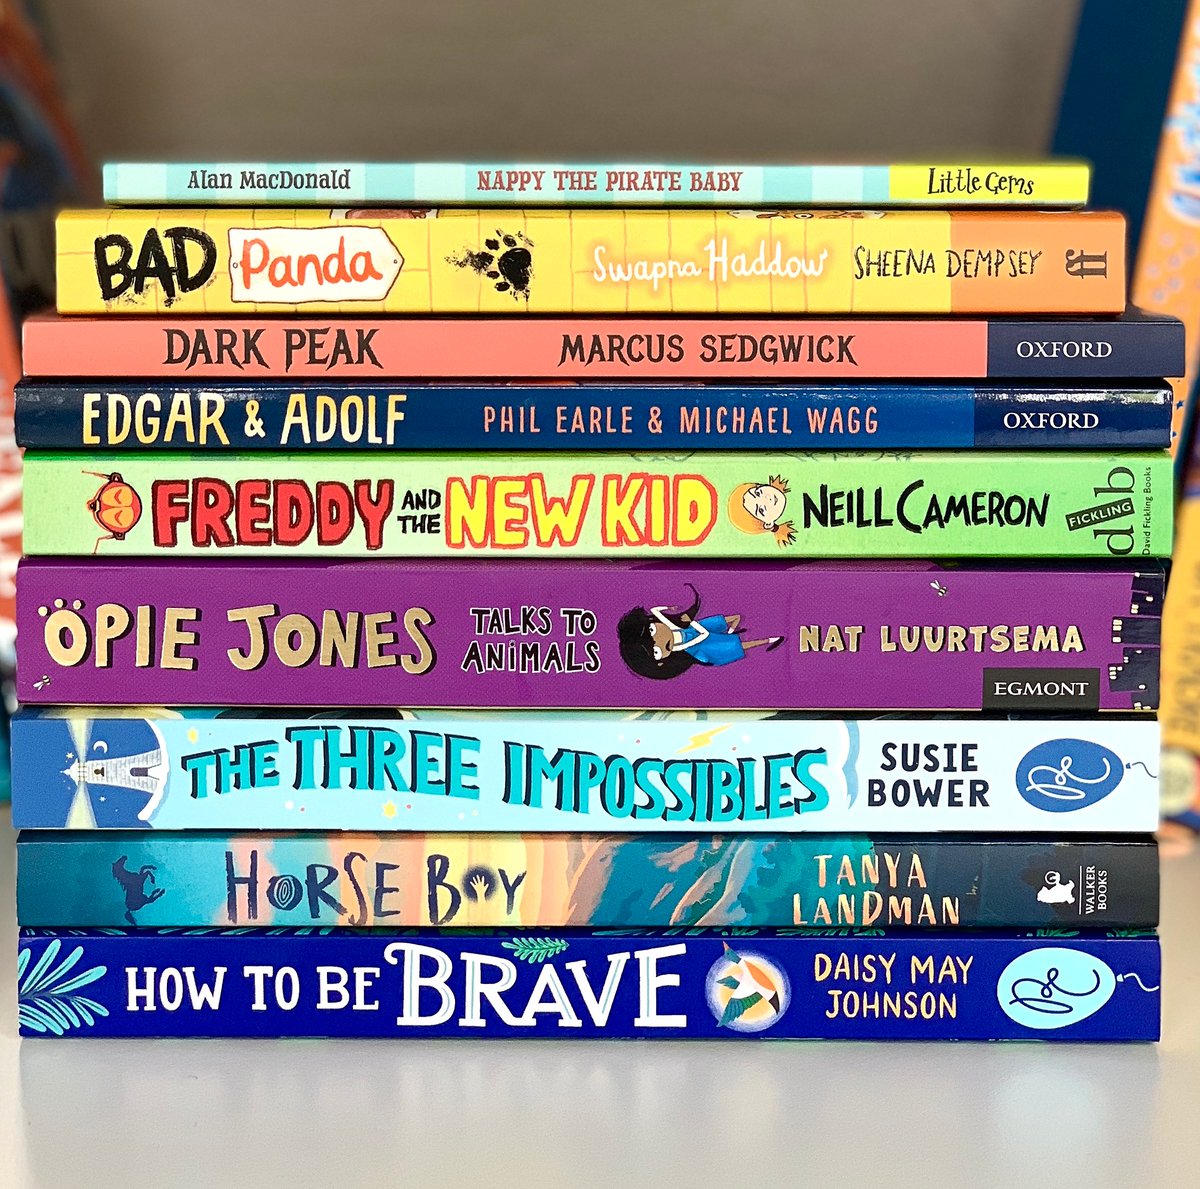 📚 COMPETITION TIME 📚 To celebrate the kids heading #backtoschool we're giving away this fantastic bundle of books to one lucky school library. All teachers & parents welcome to enter. Simply: 1. Follow us @parrot_street 2. Retweet this tweet #kidsbooks #win Winner drawn 10 Sept